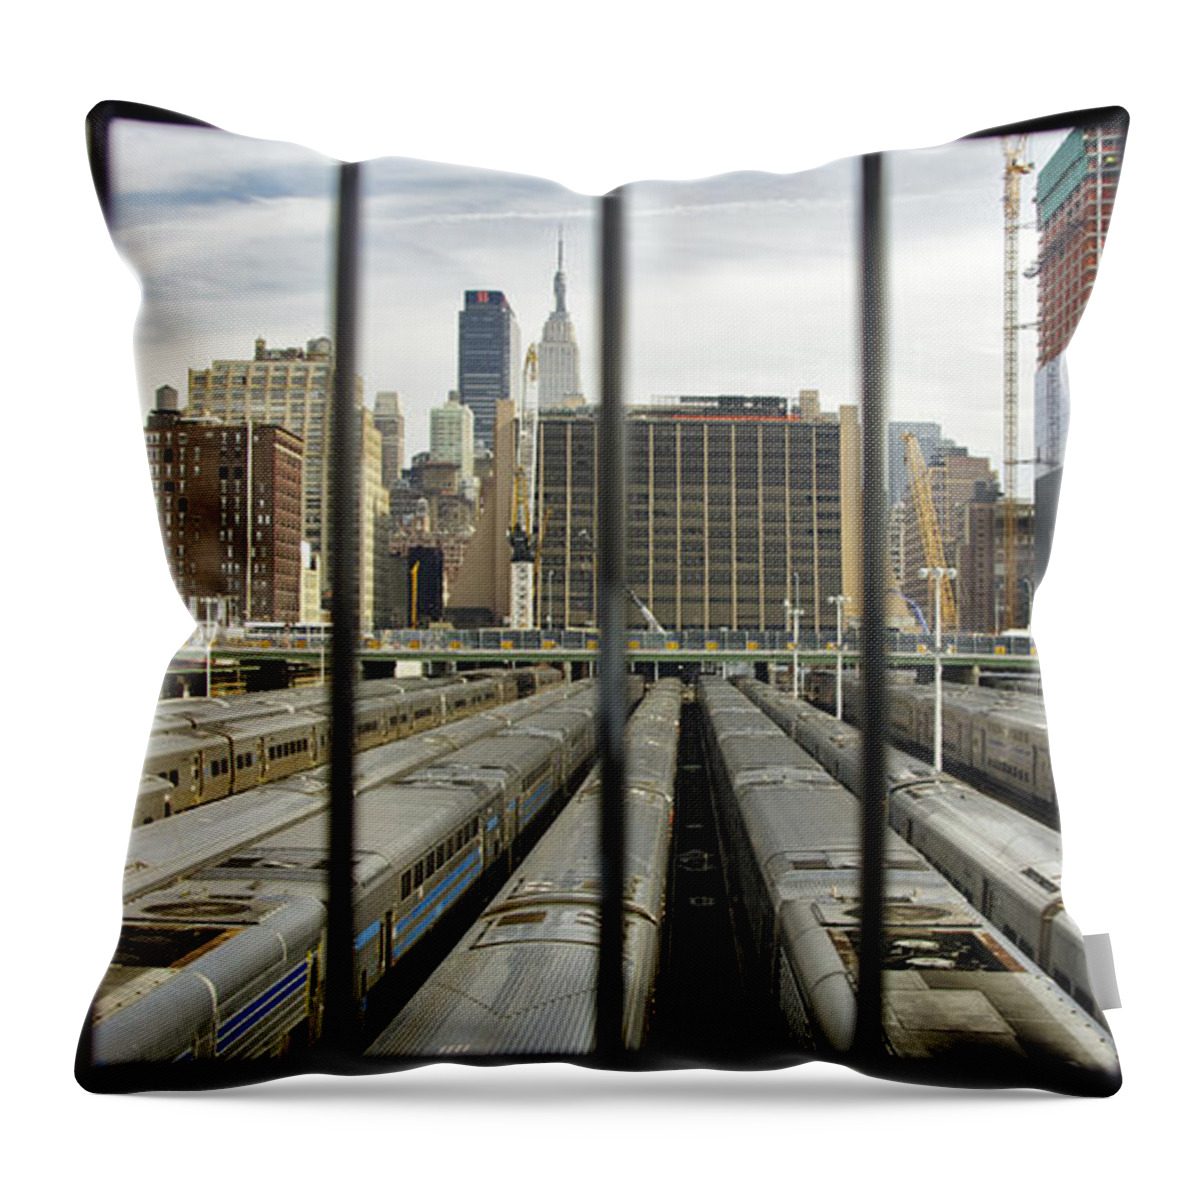 Trains Throw Pillow featuring the photograph Westside Prison Blues by Scott Evers